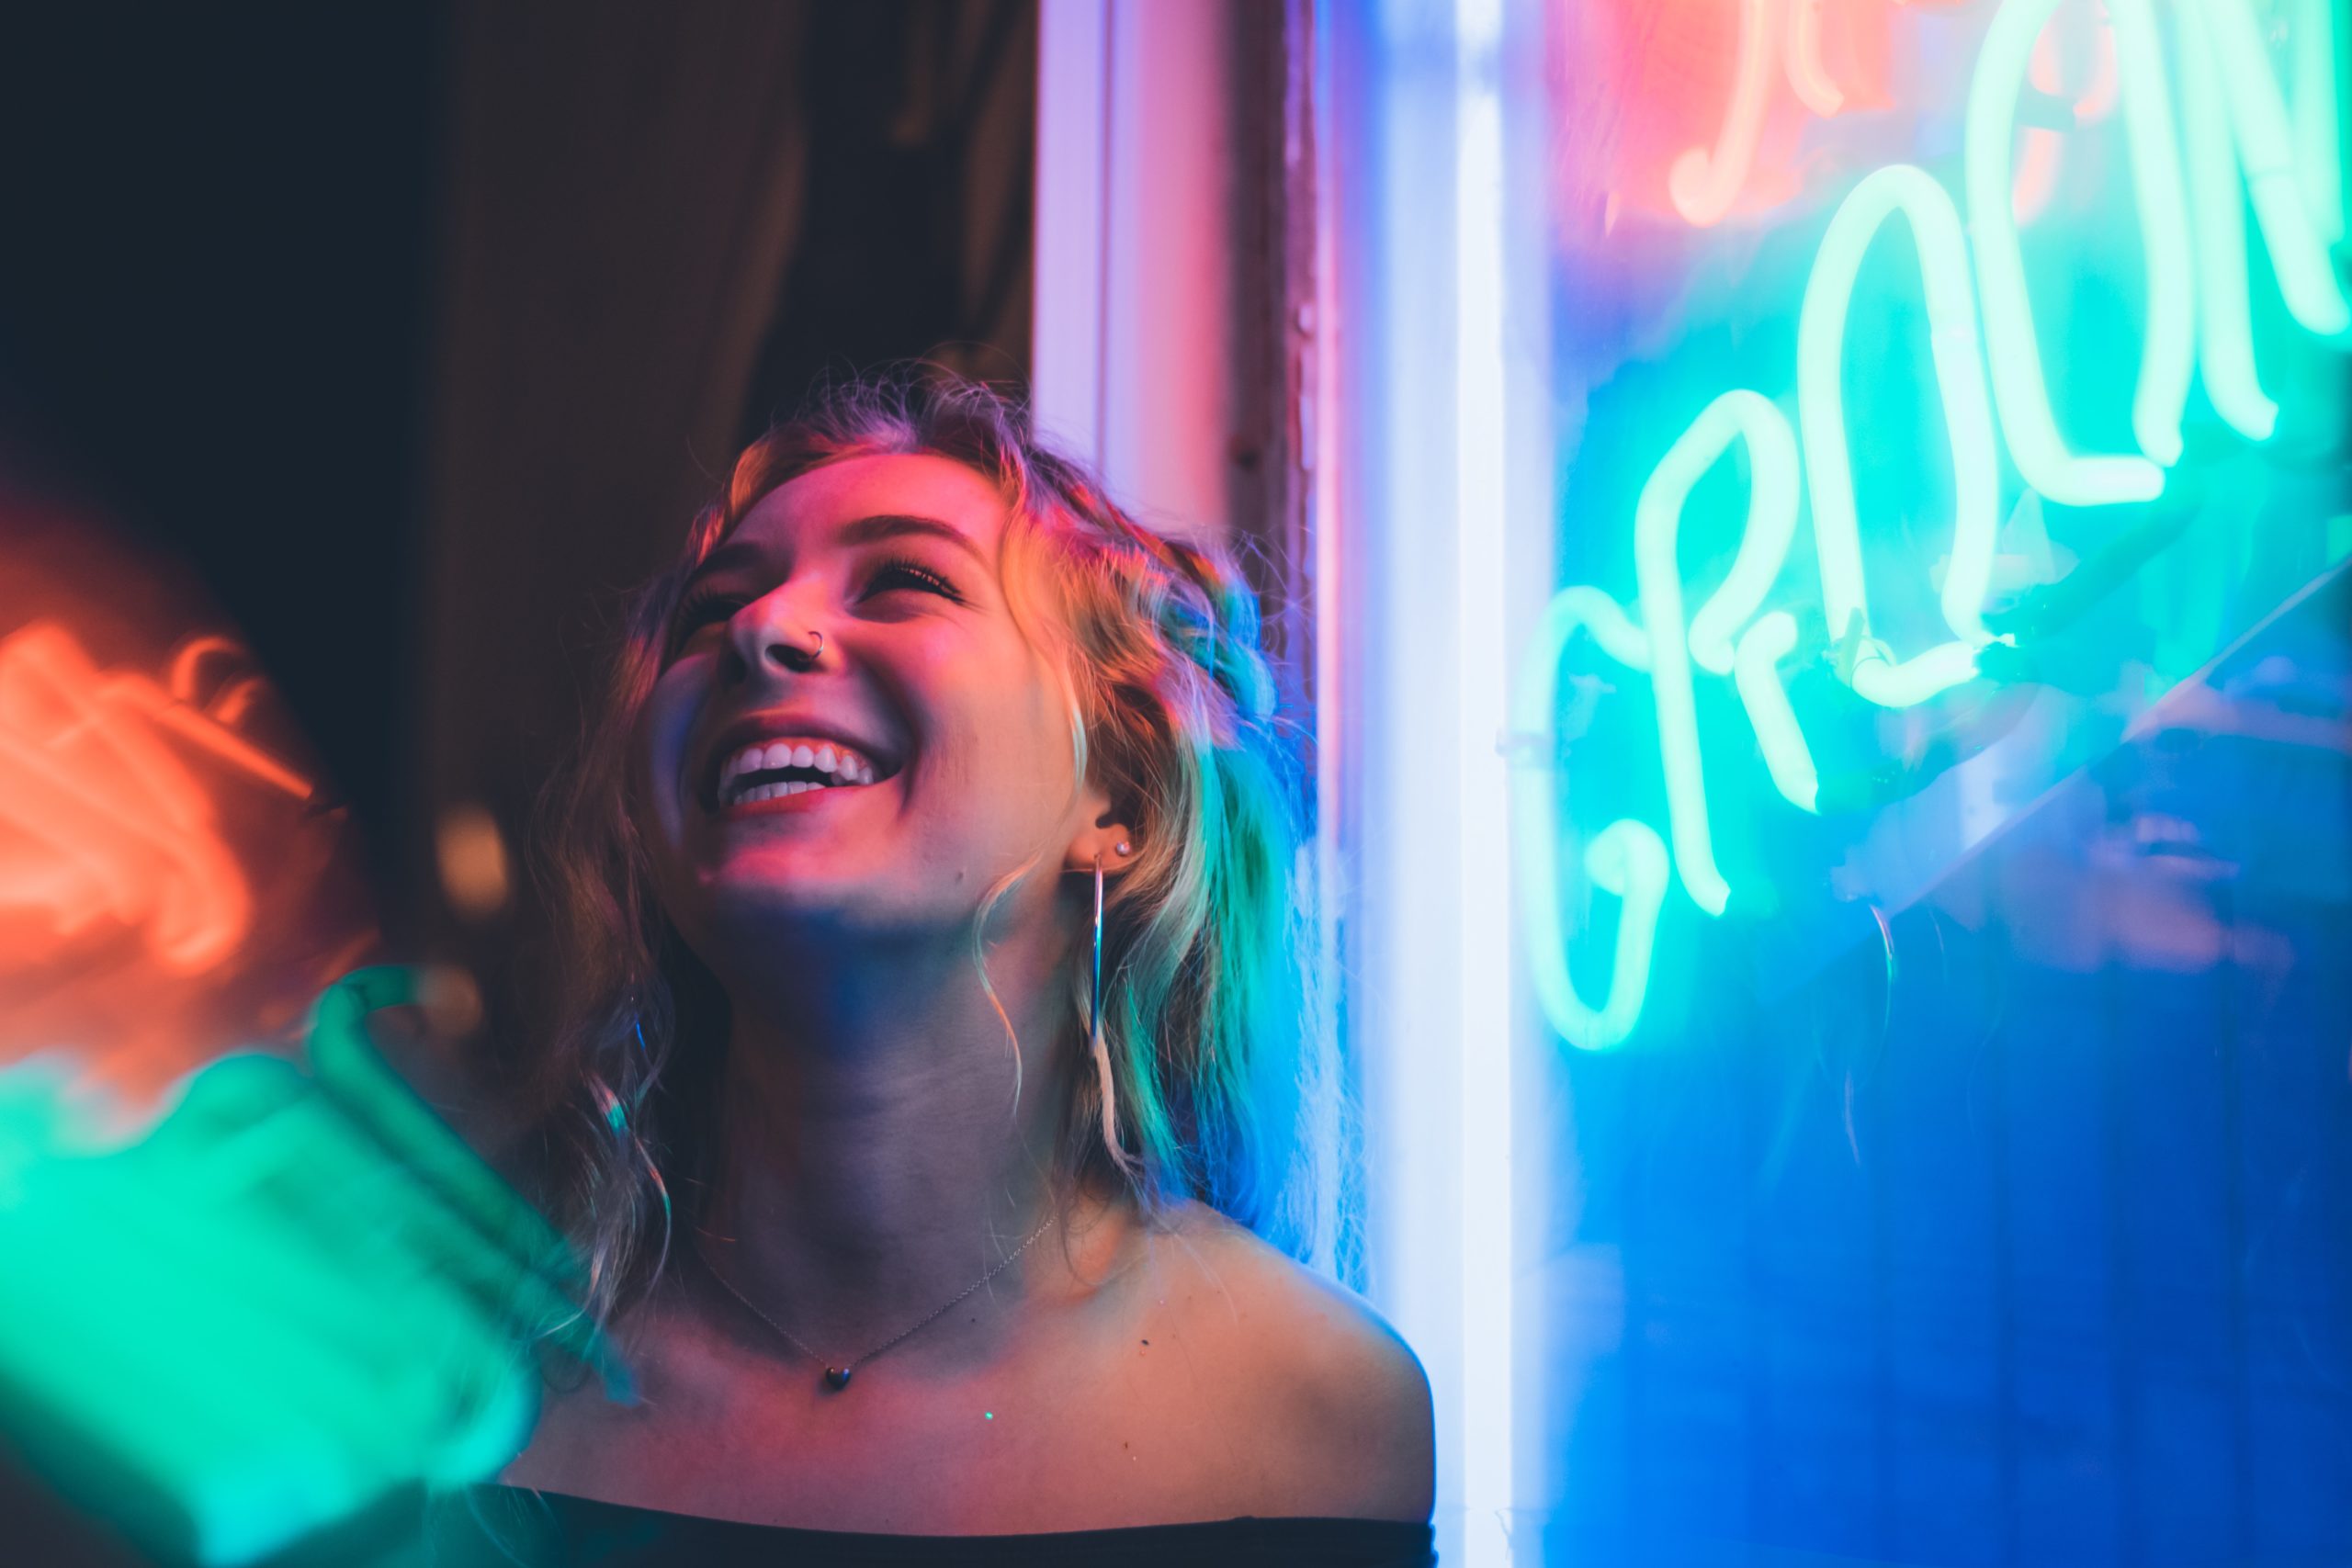 A woman smiling in the light of some neon shop signs.